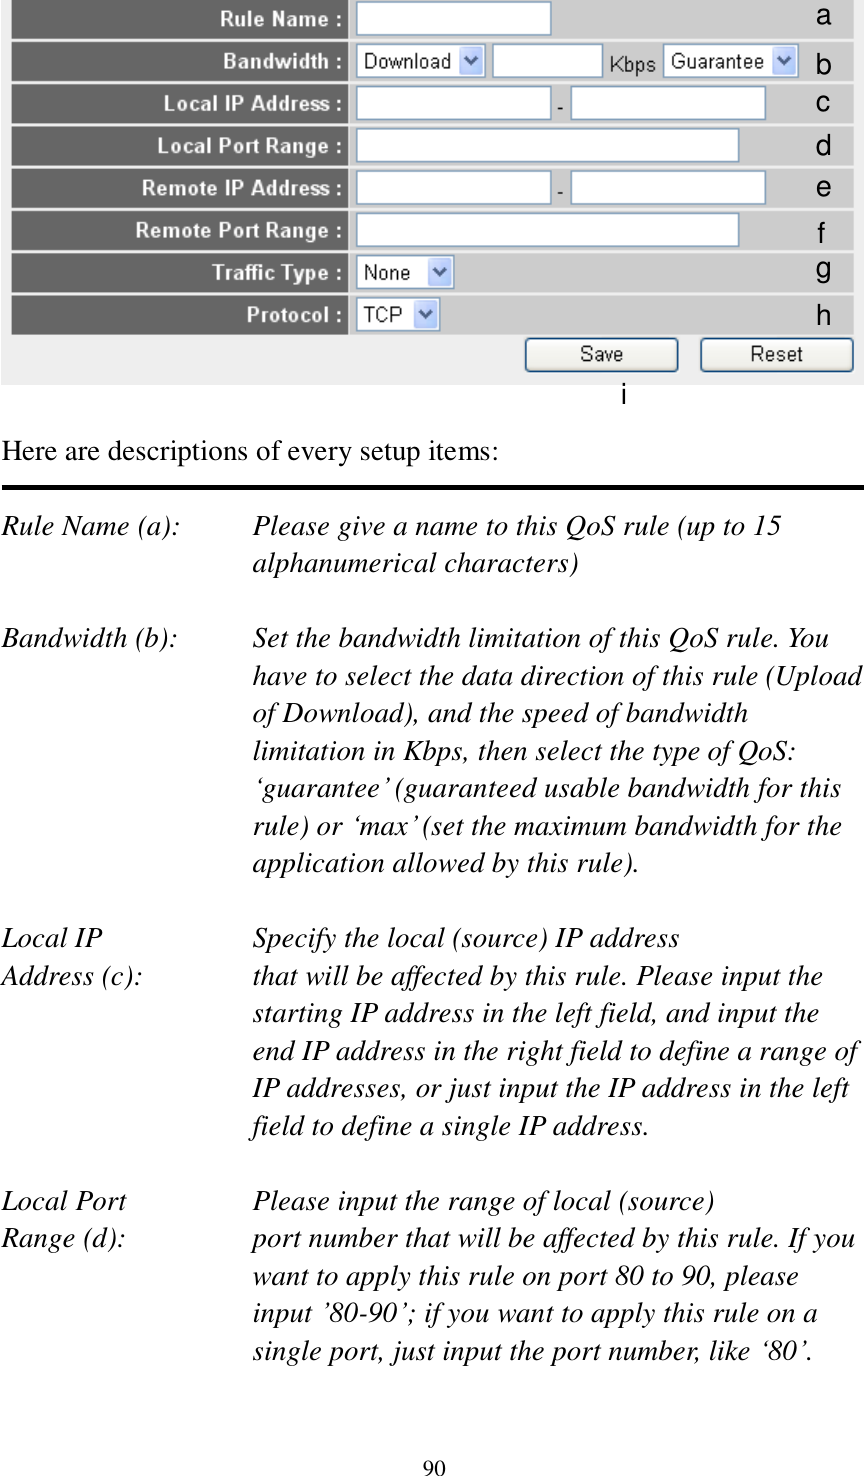 90   Here are descriptions of every setup items:  Rule Name (a):    Please give a name to this QoS rule (up to 15 alphanumerical characters)  Bandwidth (b):    Set the bandwidth limitation of this QoS rule. You have to select the data direction of this rule (Upload of Download), and the speed of bandwidth limitation in Kbps, then select the type of QoS: „guarantee‟ (guaranteed usable bandwidth for this rule) or „max‟ (set the maximum bandwidth for the application allowed by this rule).  Local IP        Specify the local (source) IP address Address (c):     that will be affected by this rule. Please input the starting IP address in the left field, and input the end IP address in the right field to define a range of IP addresses, or just input the IP address in the left field to define a single IP address.  Local Port       Please input the range of local (source) Range (d):    port number that will be affected by this rule. If you want to apply this rule on port 80 to 90, please input ‟80-90‟; if you want to apply this rule on a single port, just input the port number, like „80‟.  a b c d e f g h i 